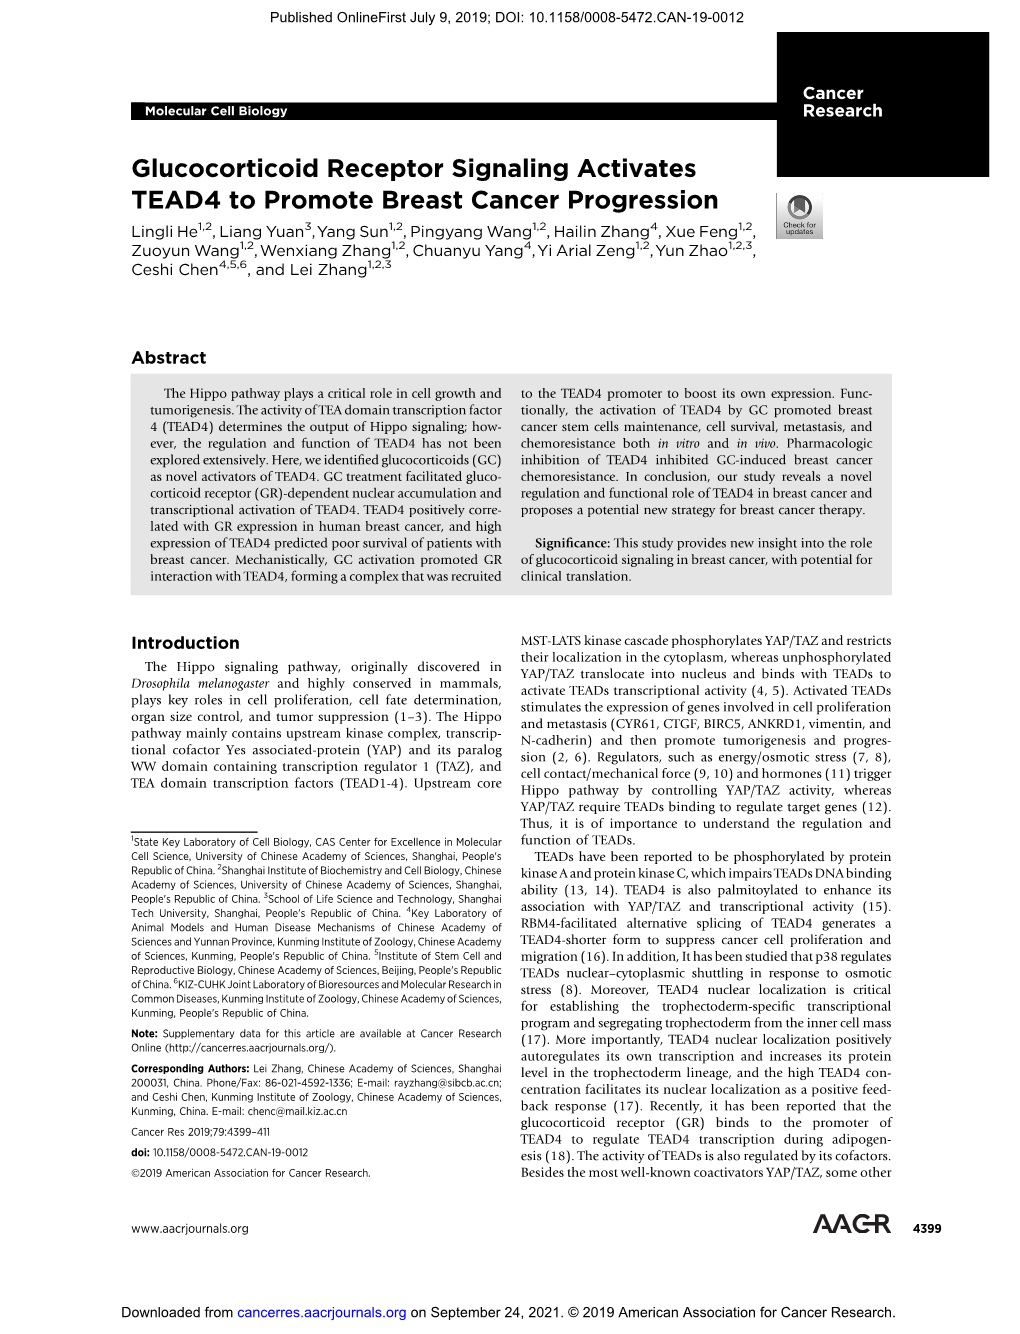 Glucocorticoid Receptor Signaling Activates TEAD4 to Promote Breast